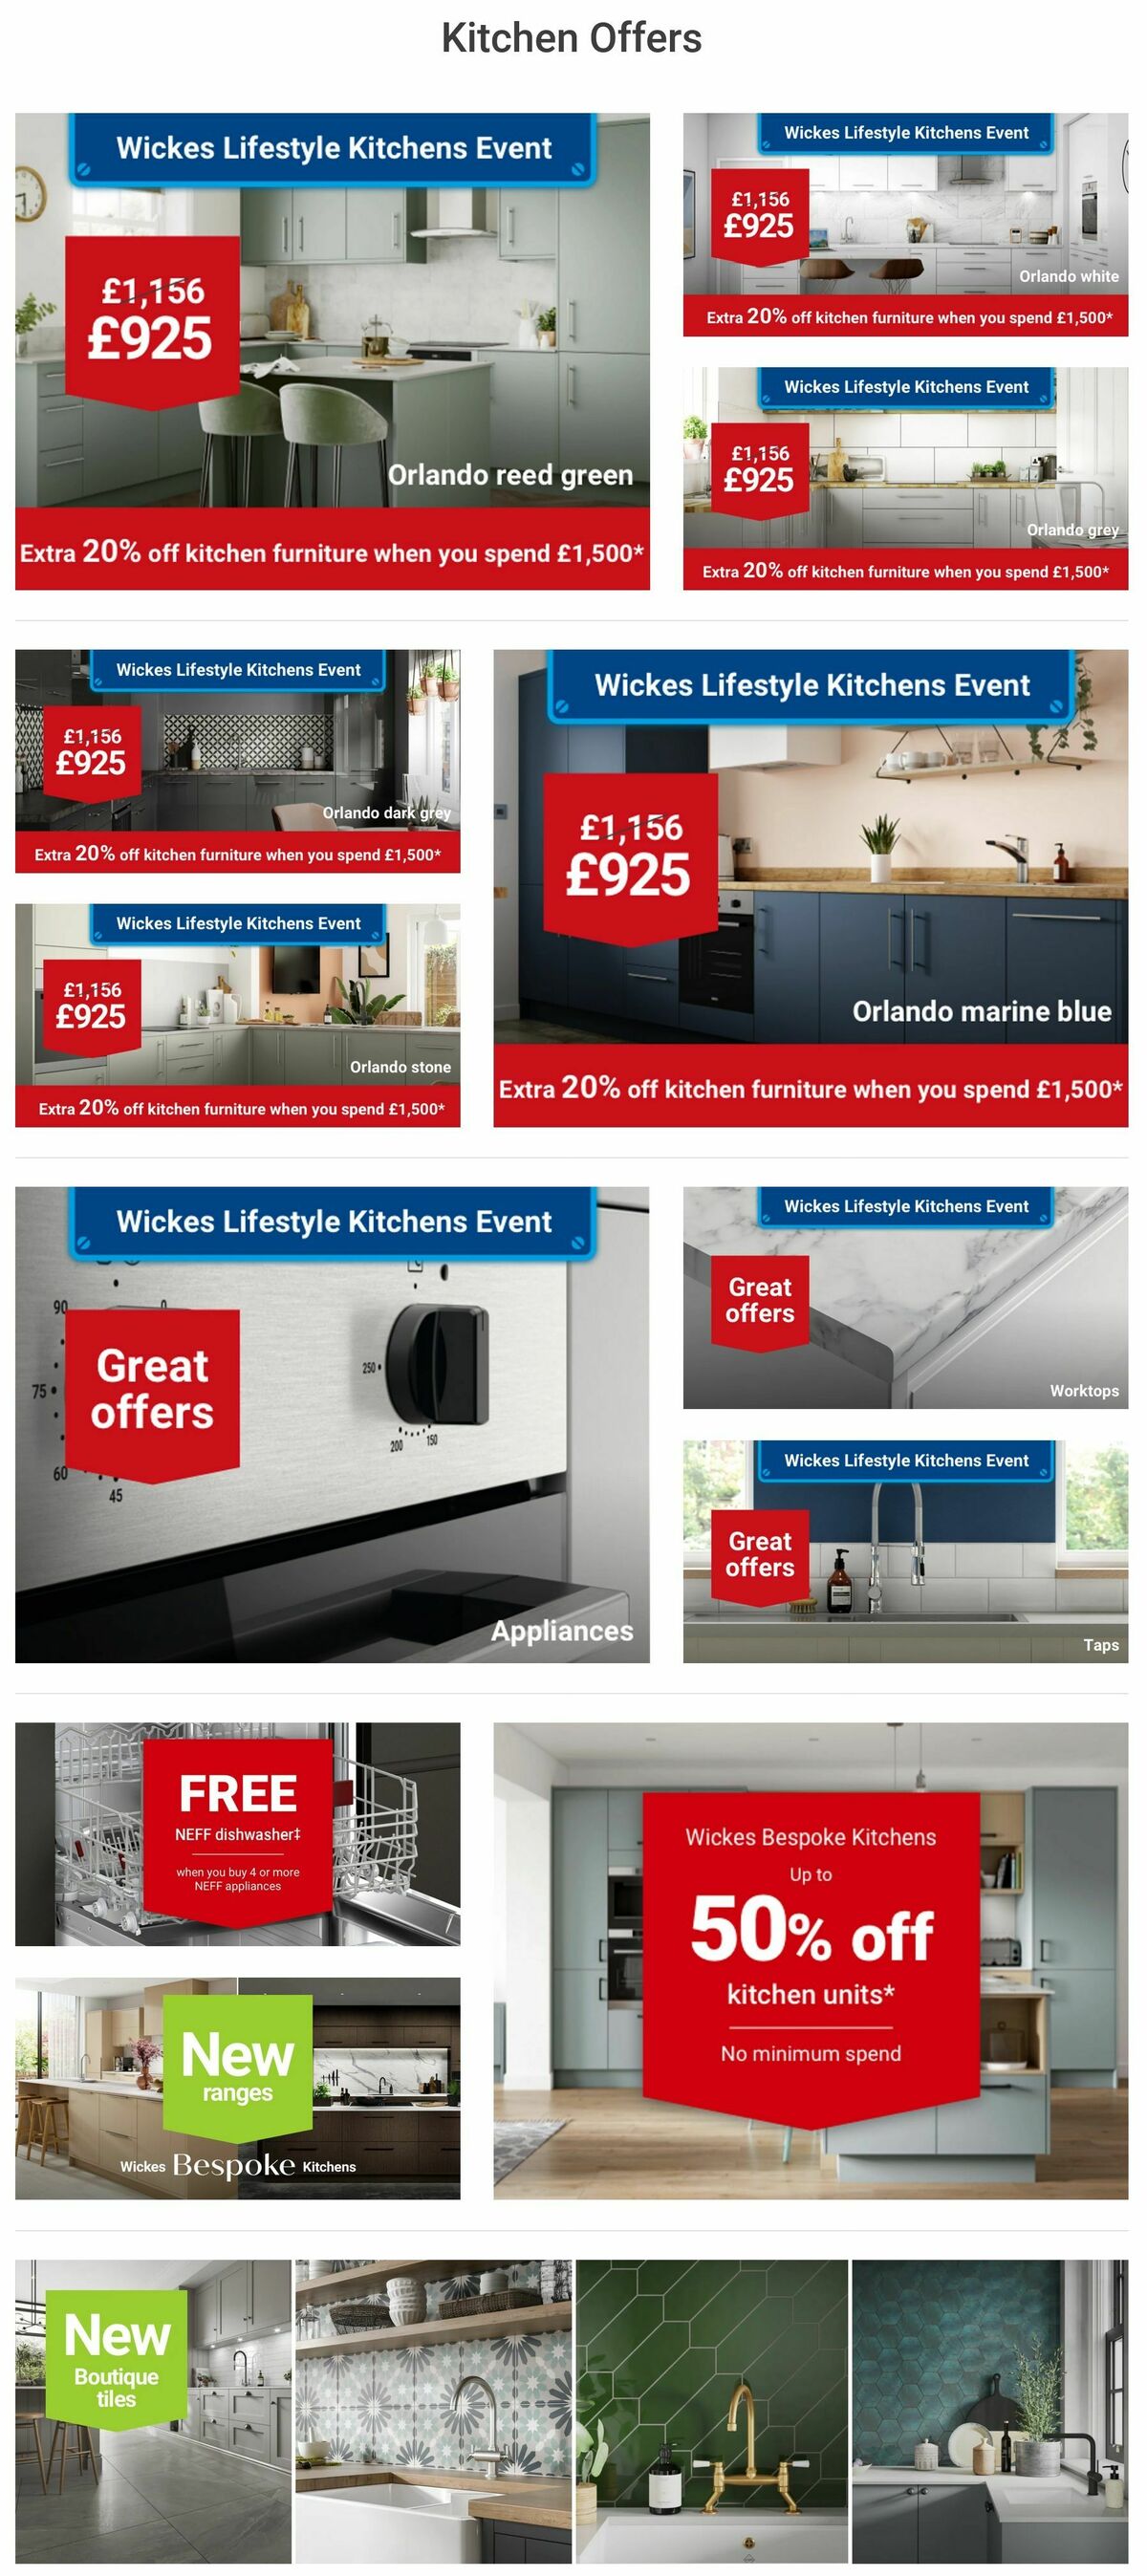 Wickes Offers from 15 September